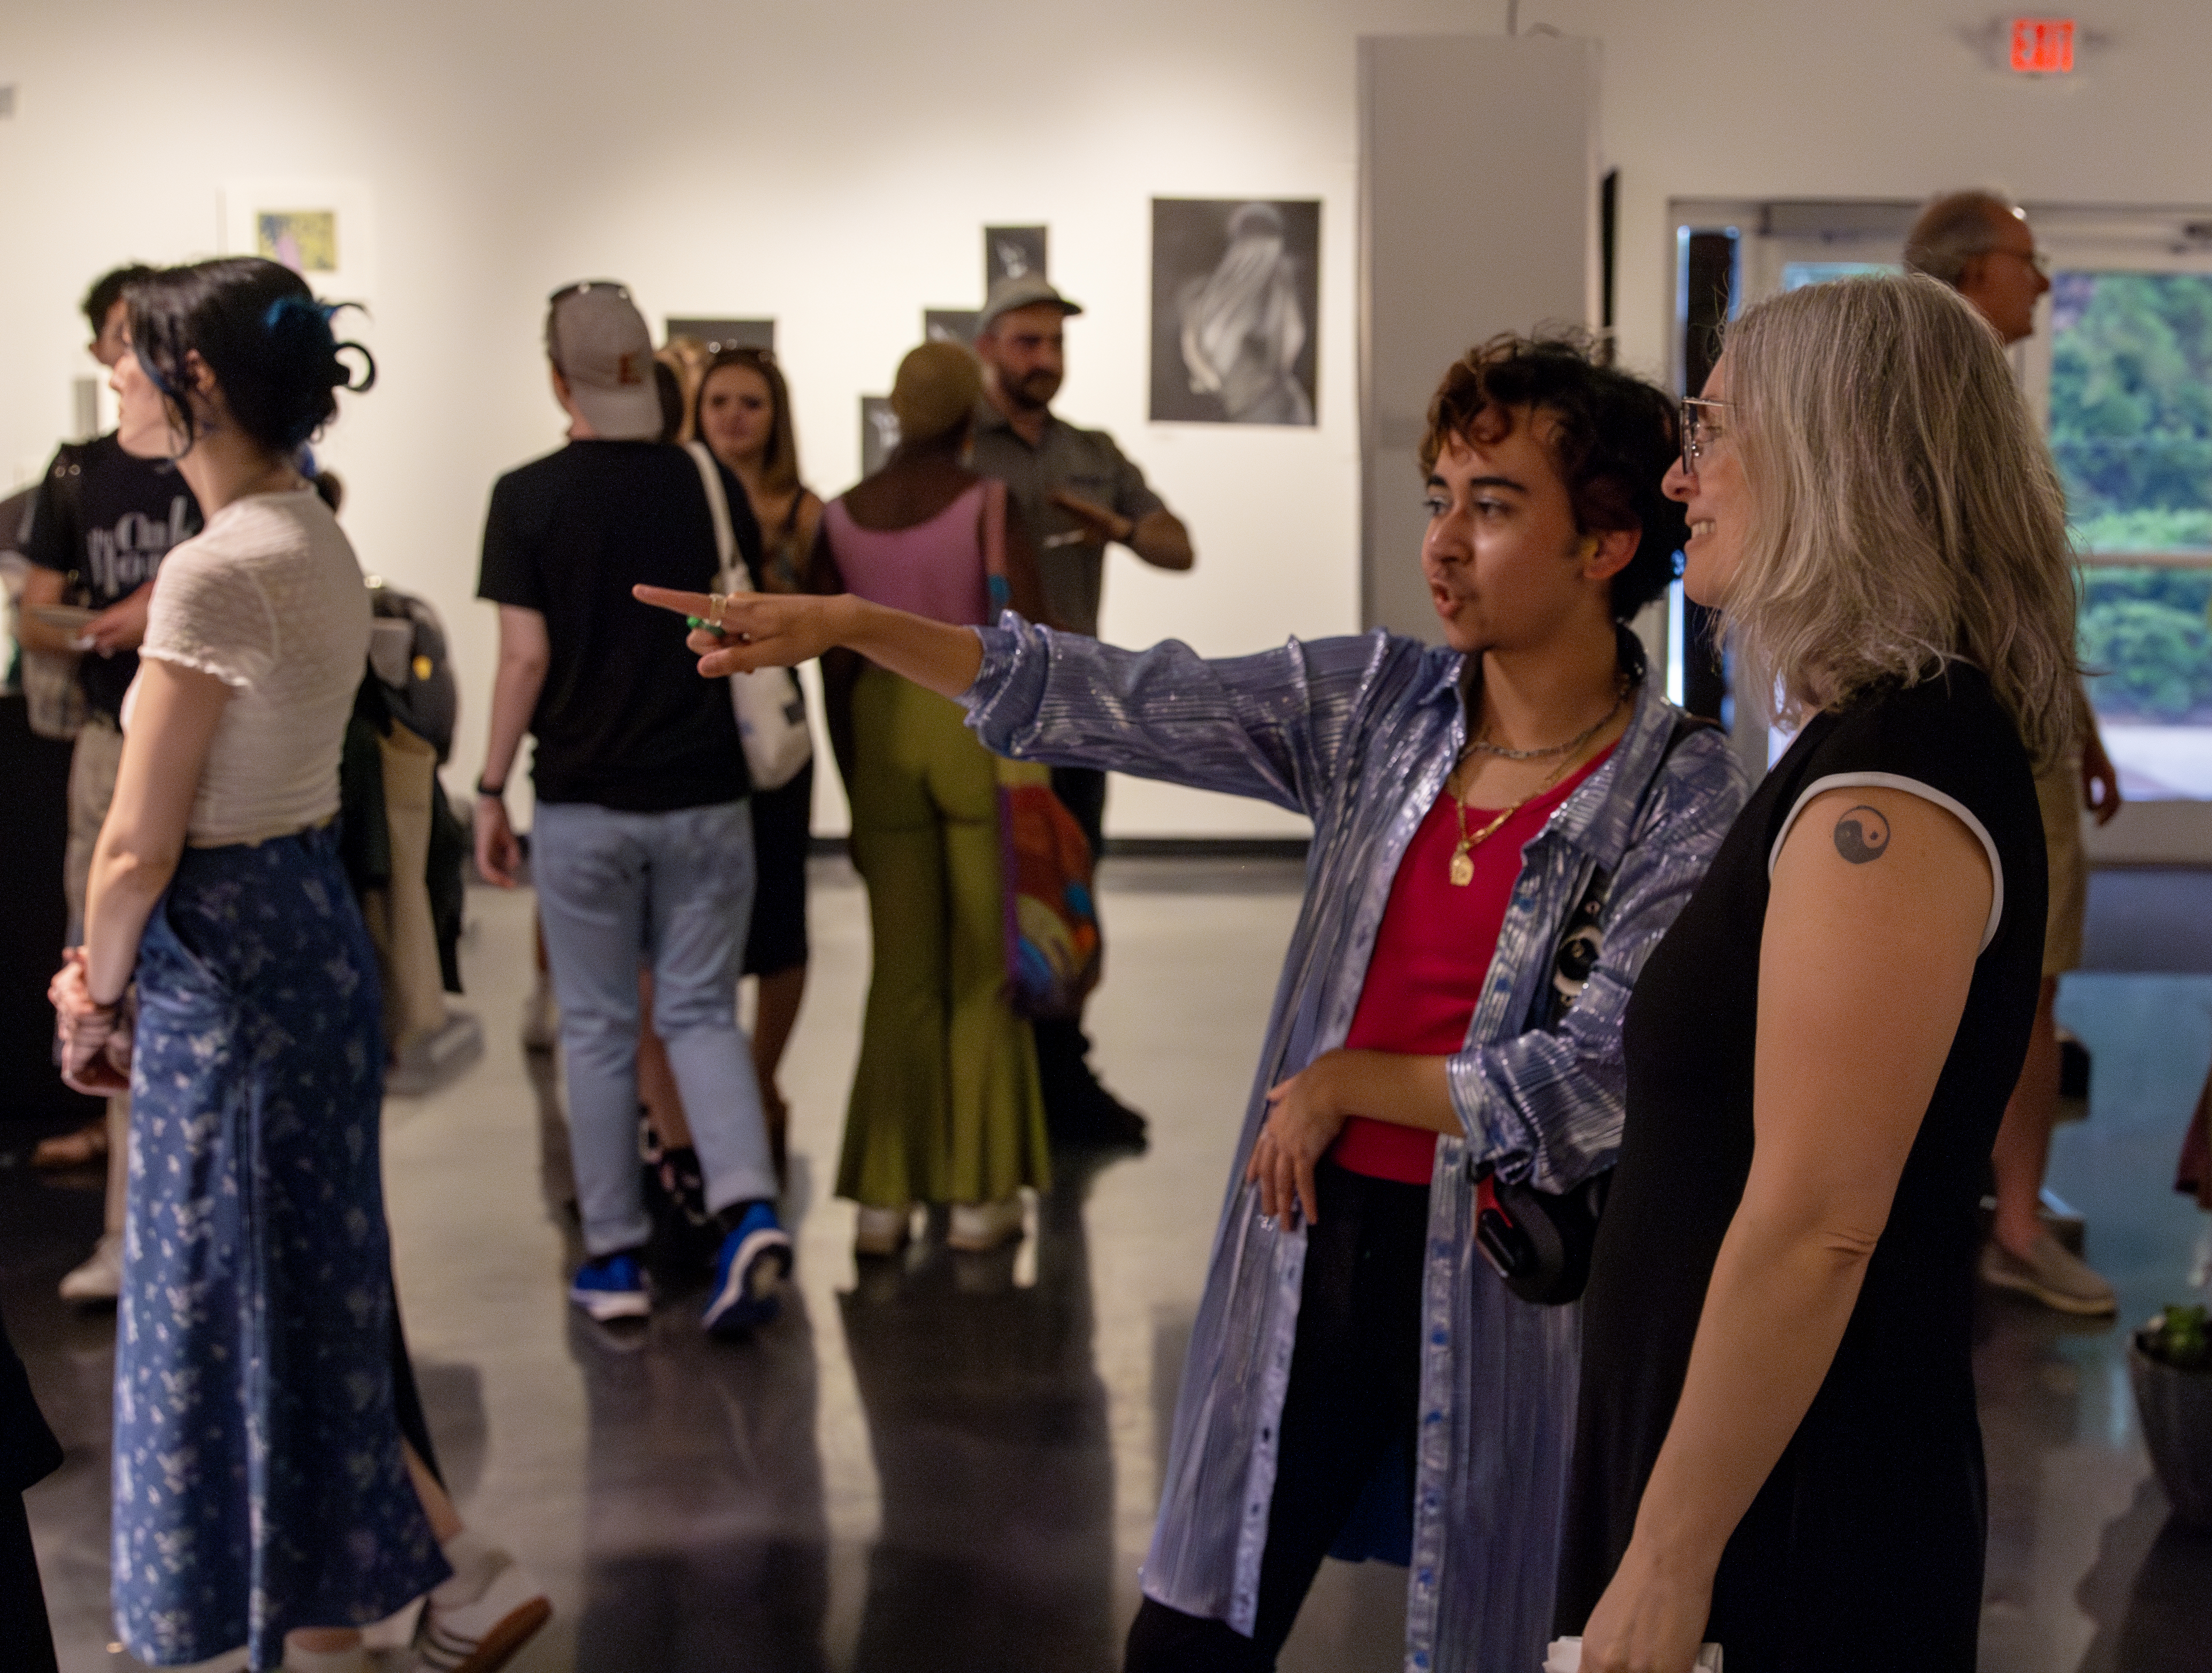 Two people point at and discuss art in a crowded gallery